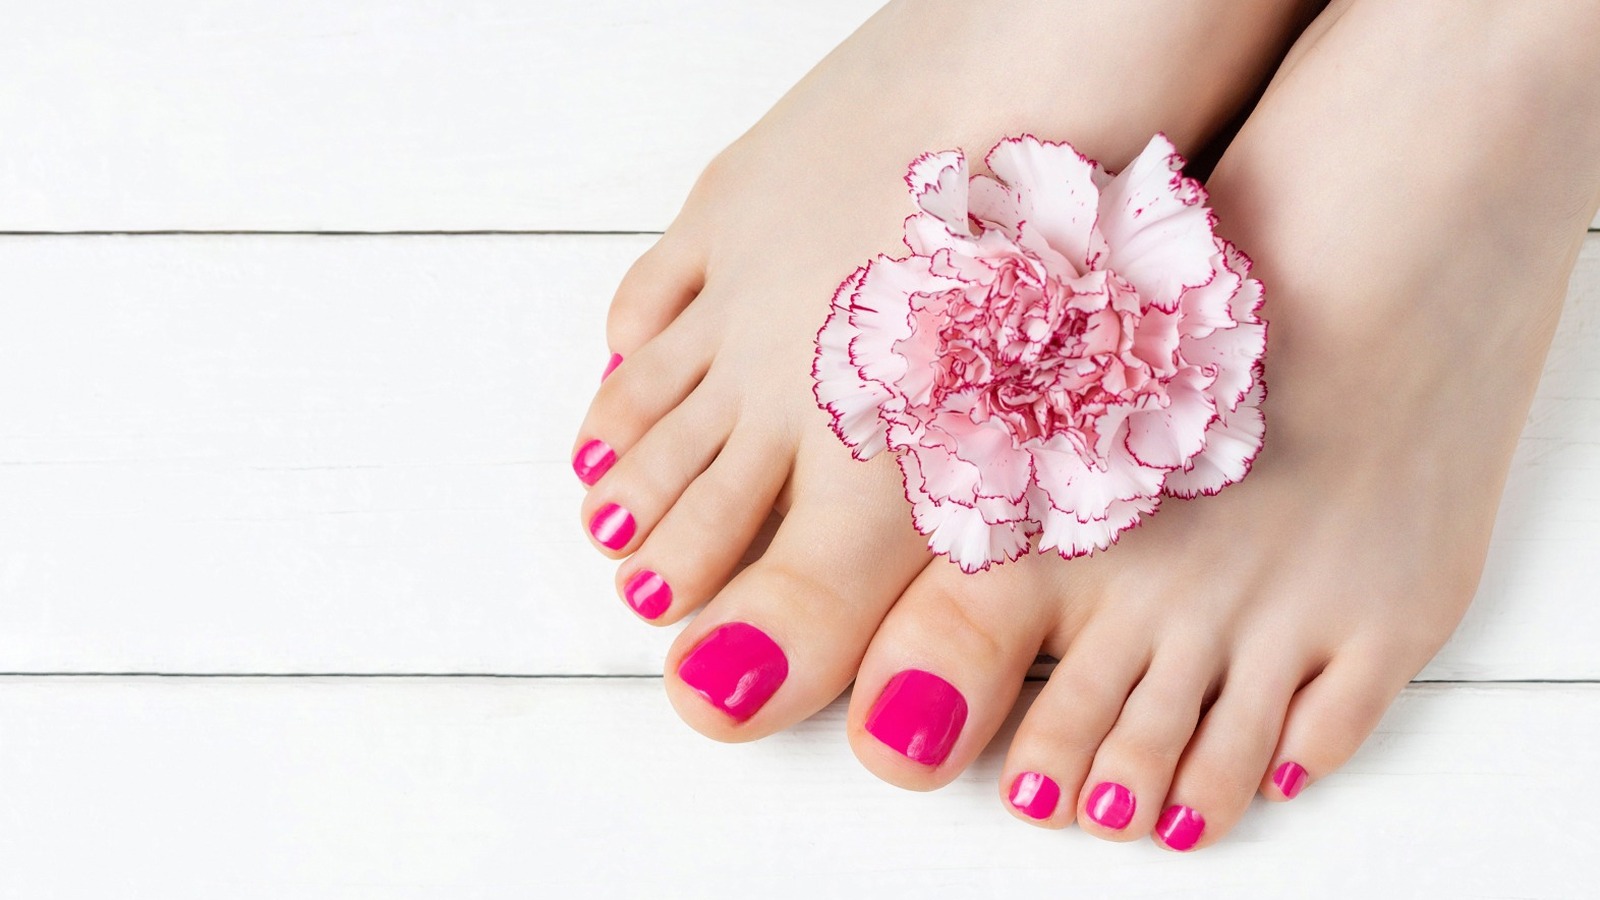 https://www.women.com/img/gallery/sandal-season-is-commencing-with-hot-pedicure-trends-that-are-begging-you-to-go-bold/l-intro-1687961222.jpg